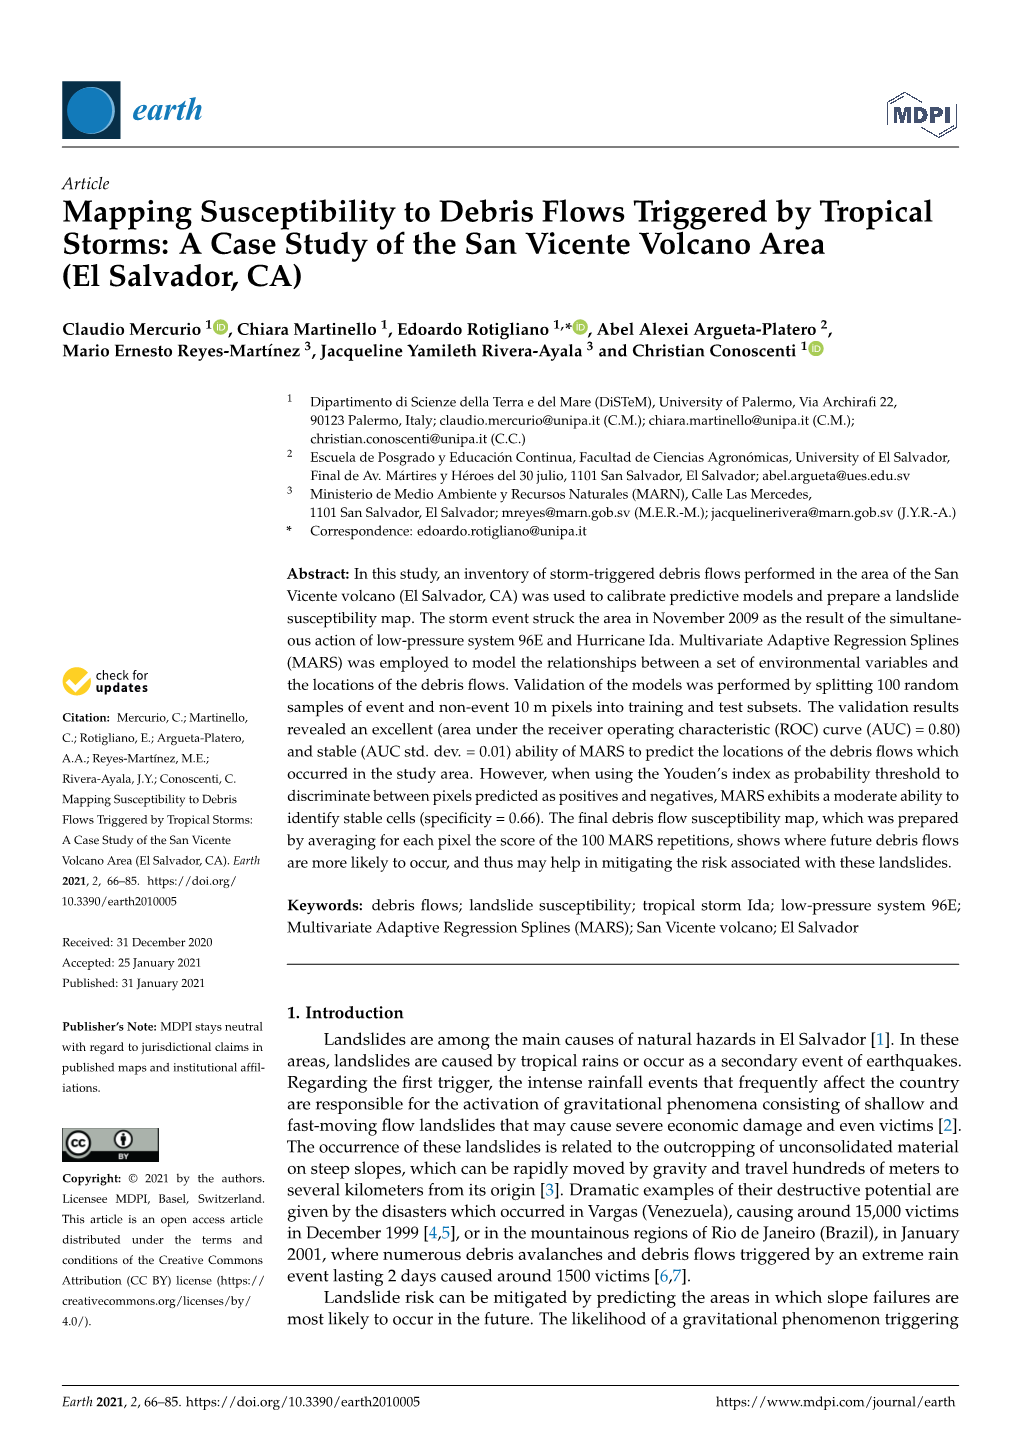 Mapping Susceptibility to Debris Flows Triggered by Tropical Storms: a Case Study of the San Vicente Volcano Area (El Salvador, CA)